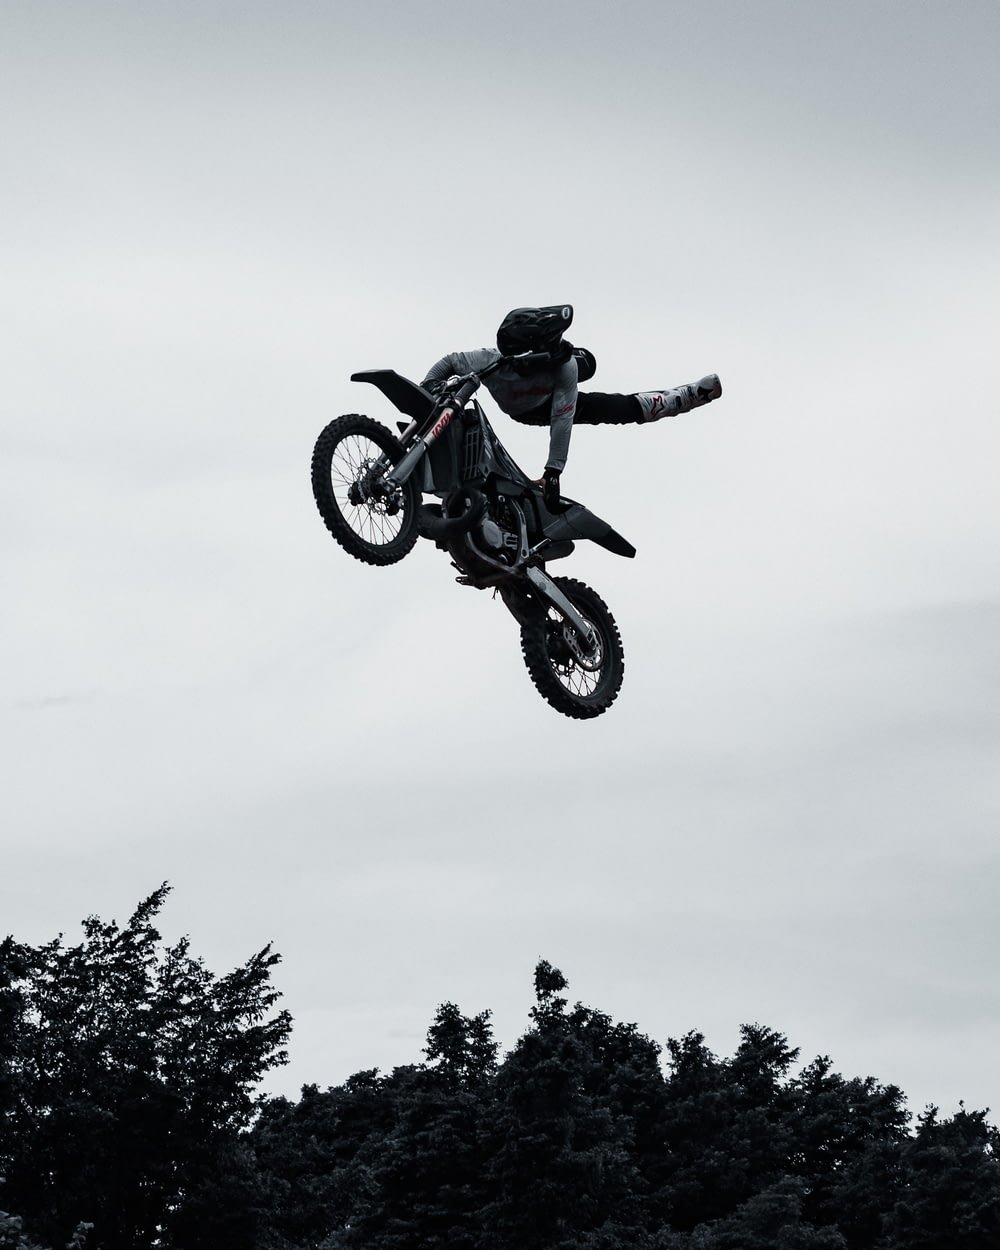 a man flying through the air while riding a motorcycle